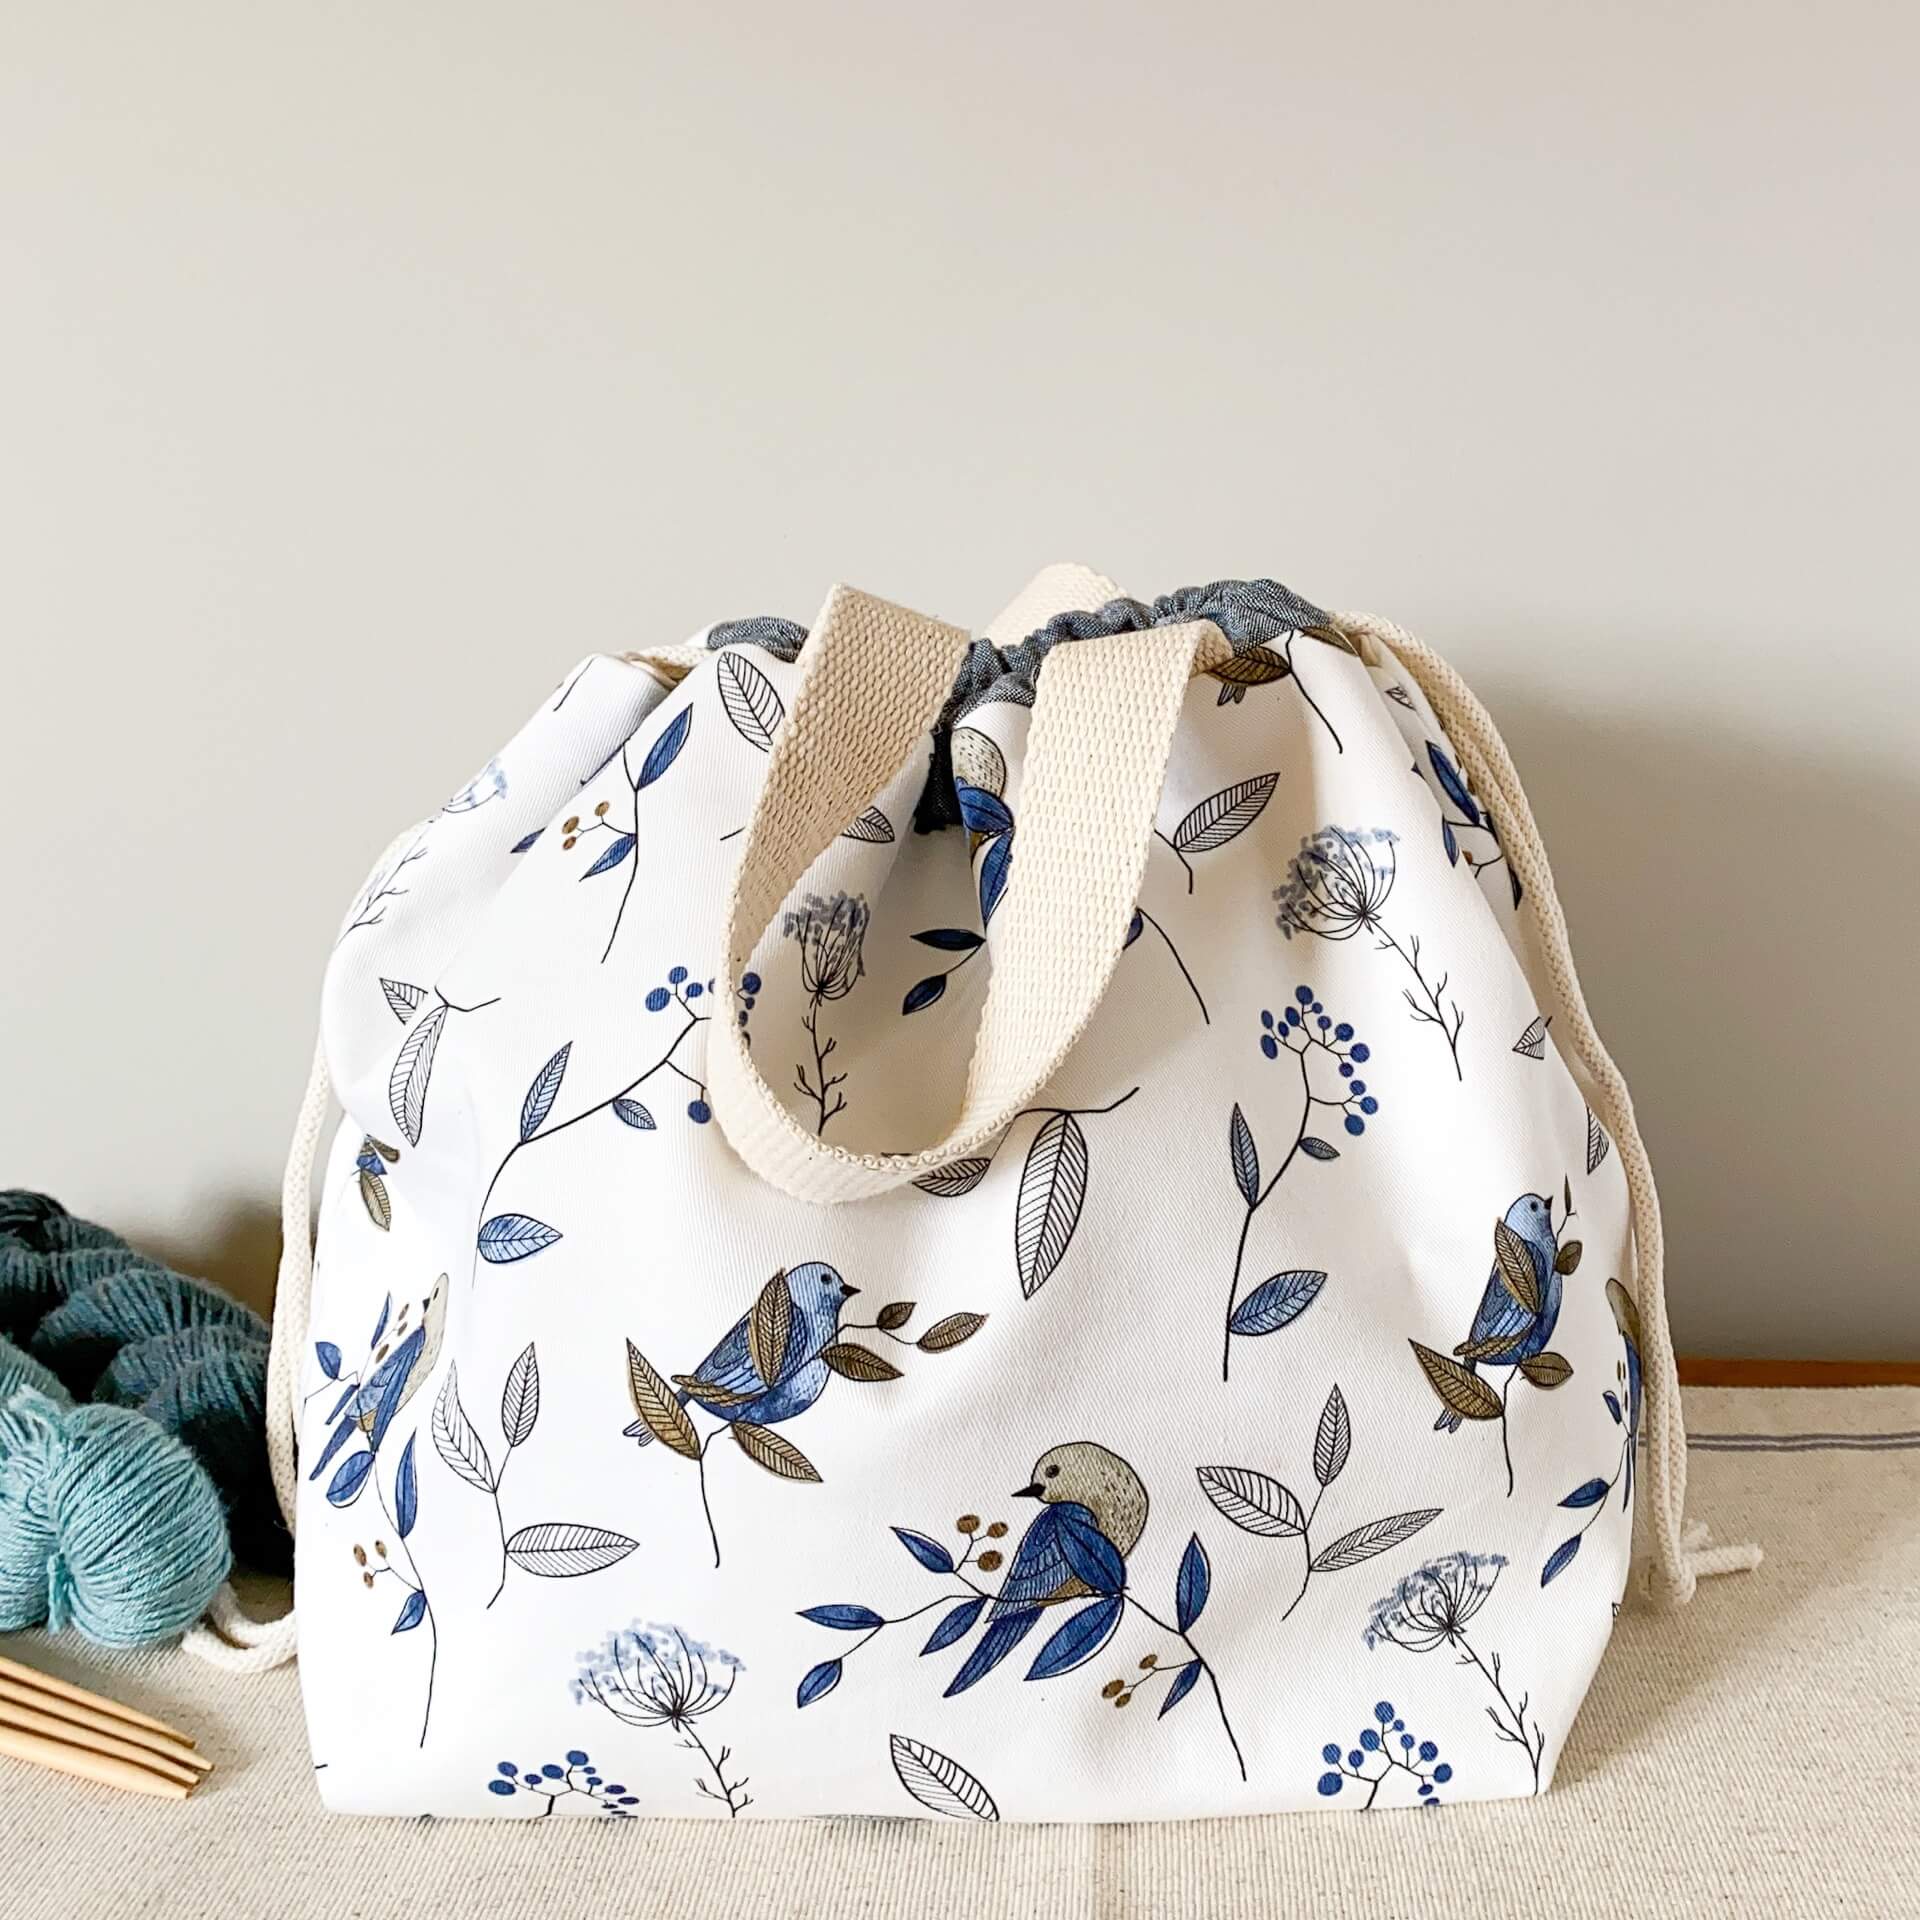 A large knitting project bag, made using a pretty blue bird print, sits on a wooden table next to some yarn and knitting needles. The bag is pulled closed. 